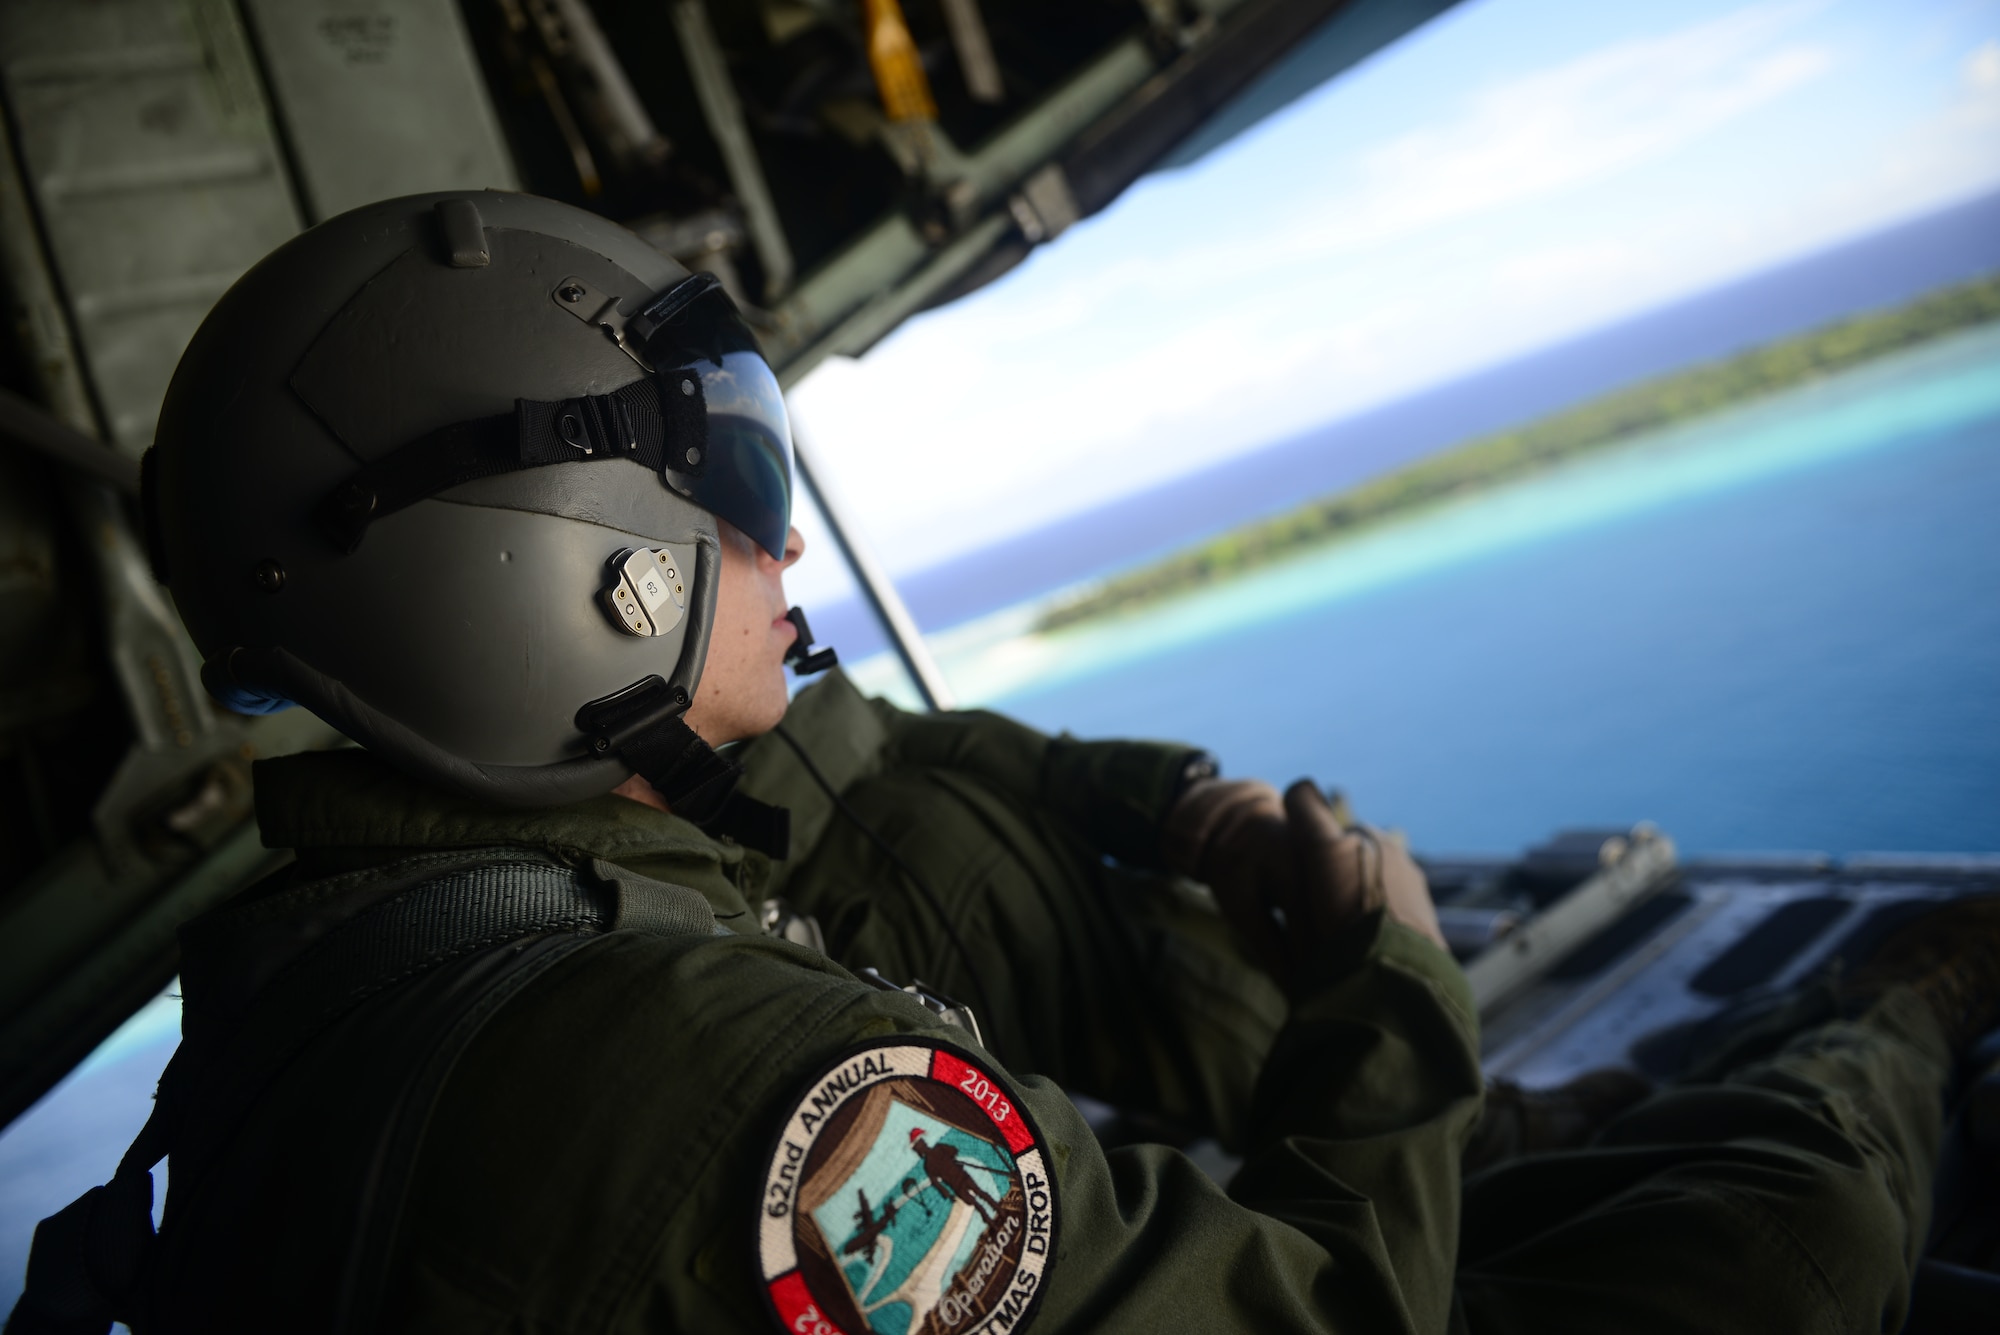 Staff Sgt. Renford Forbes, a loadmaster with the 36th Airlift Squadron, Yokota Air Base, Japan, looks out from the ramp of a C-130H aircraft while flying near the Faraulep Atoll, Federated States of Micronesia, during Operation Christmas Drop Dec. 10, 2013. This year marks the 62nd year of Operation Christmas Drop, which began in 1952, making it the world's longest running airdrop mission. Every December, C-130 Hercules crews from the 374th Airlift Wing at Yokota Air Base, Japan, partner with the 36th Wing at Andersen Air Force Base, Guam, to airlift food, supplies and toys to islanders throughout Micronesia. (U.S. Air Force photo by 2nd Lt. Jake Bailey/Released)